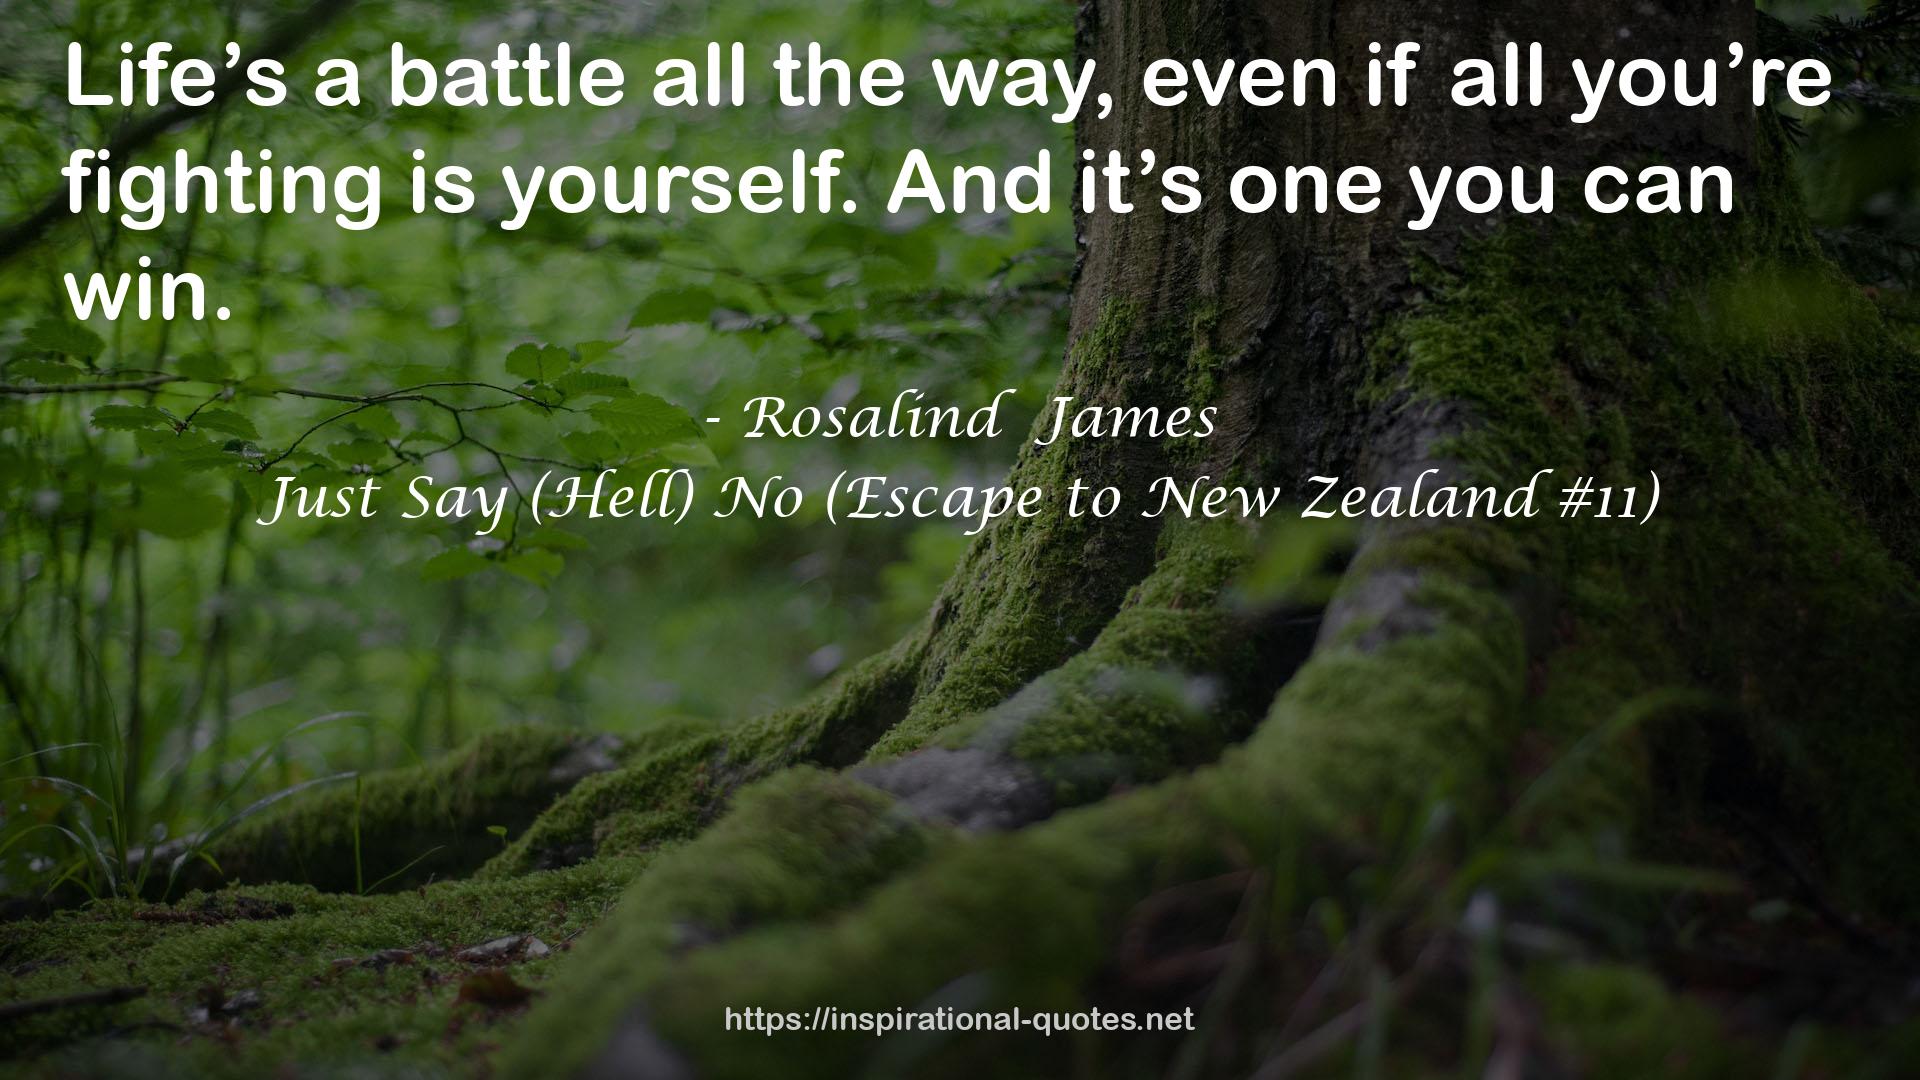 Just Say (Hell) No (Escape to New Zealand #11) QUOTES